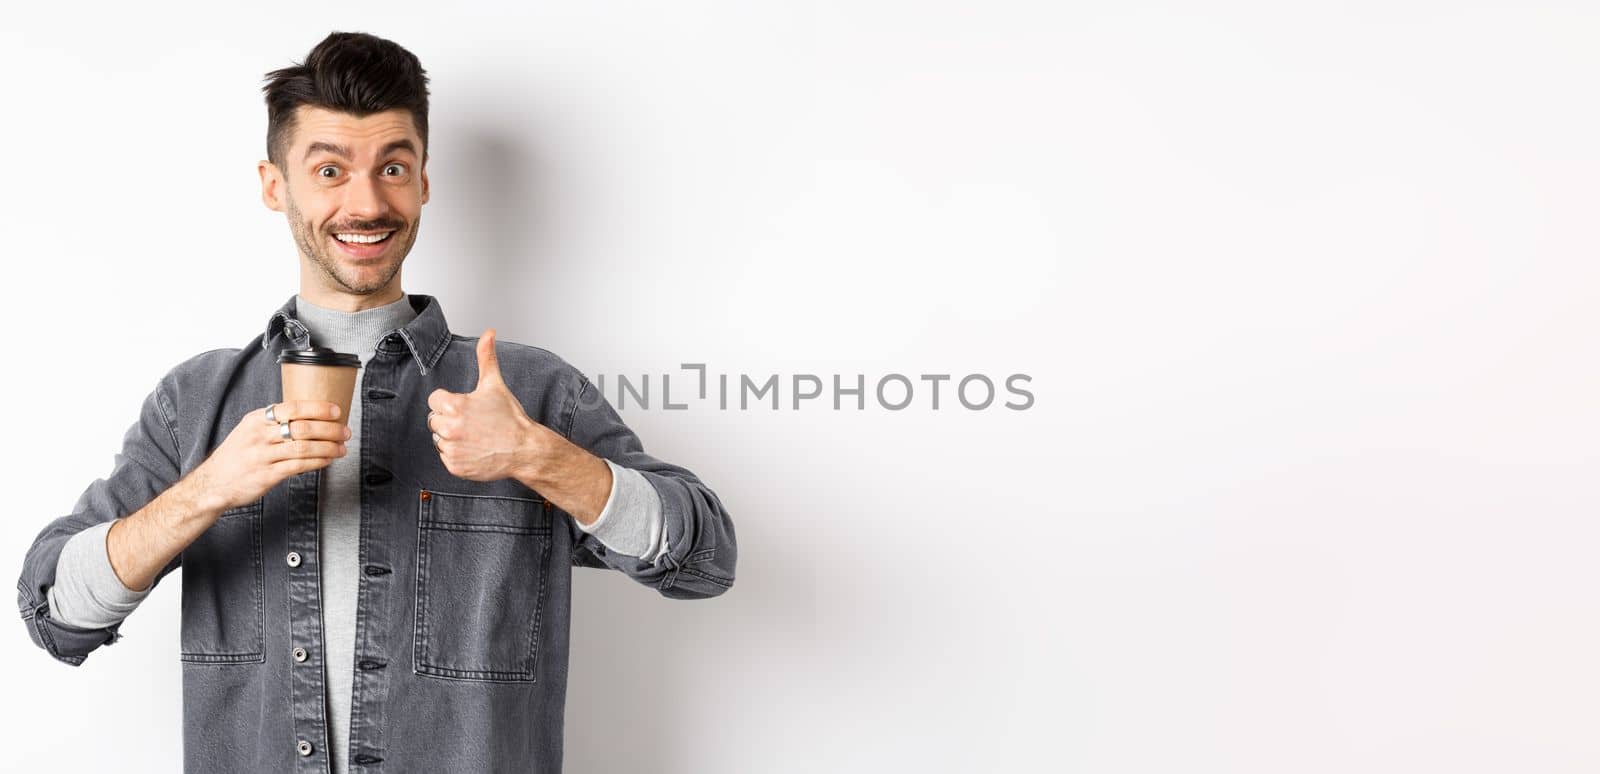 Very good drink. Smiling stylish guy drinking coffee and showing thumbs up, praise coffee shop, standing satisfied on white background.